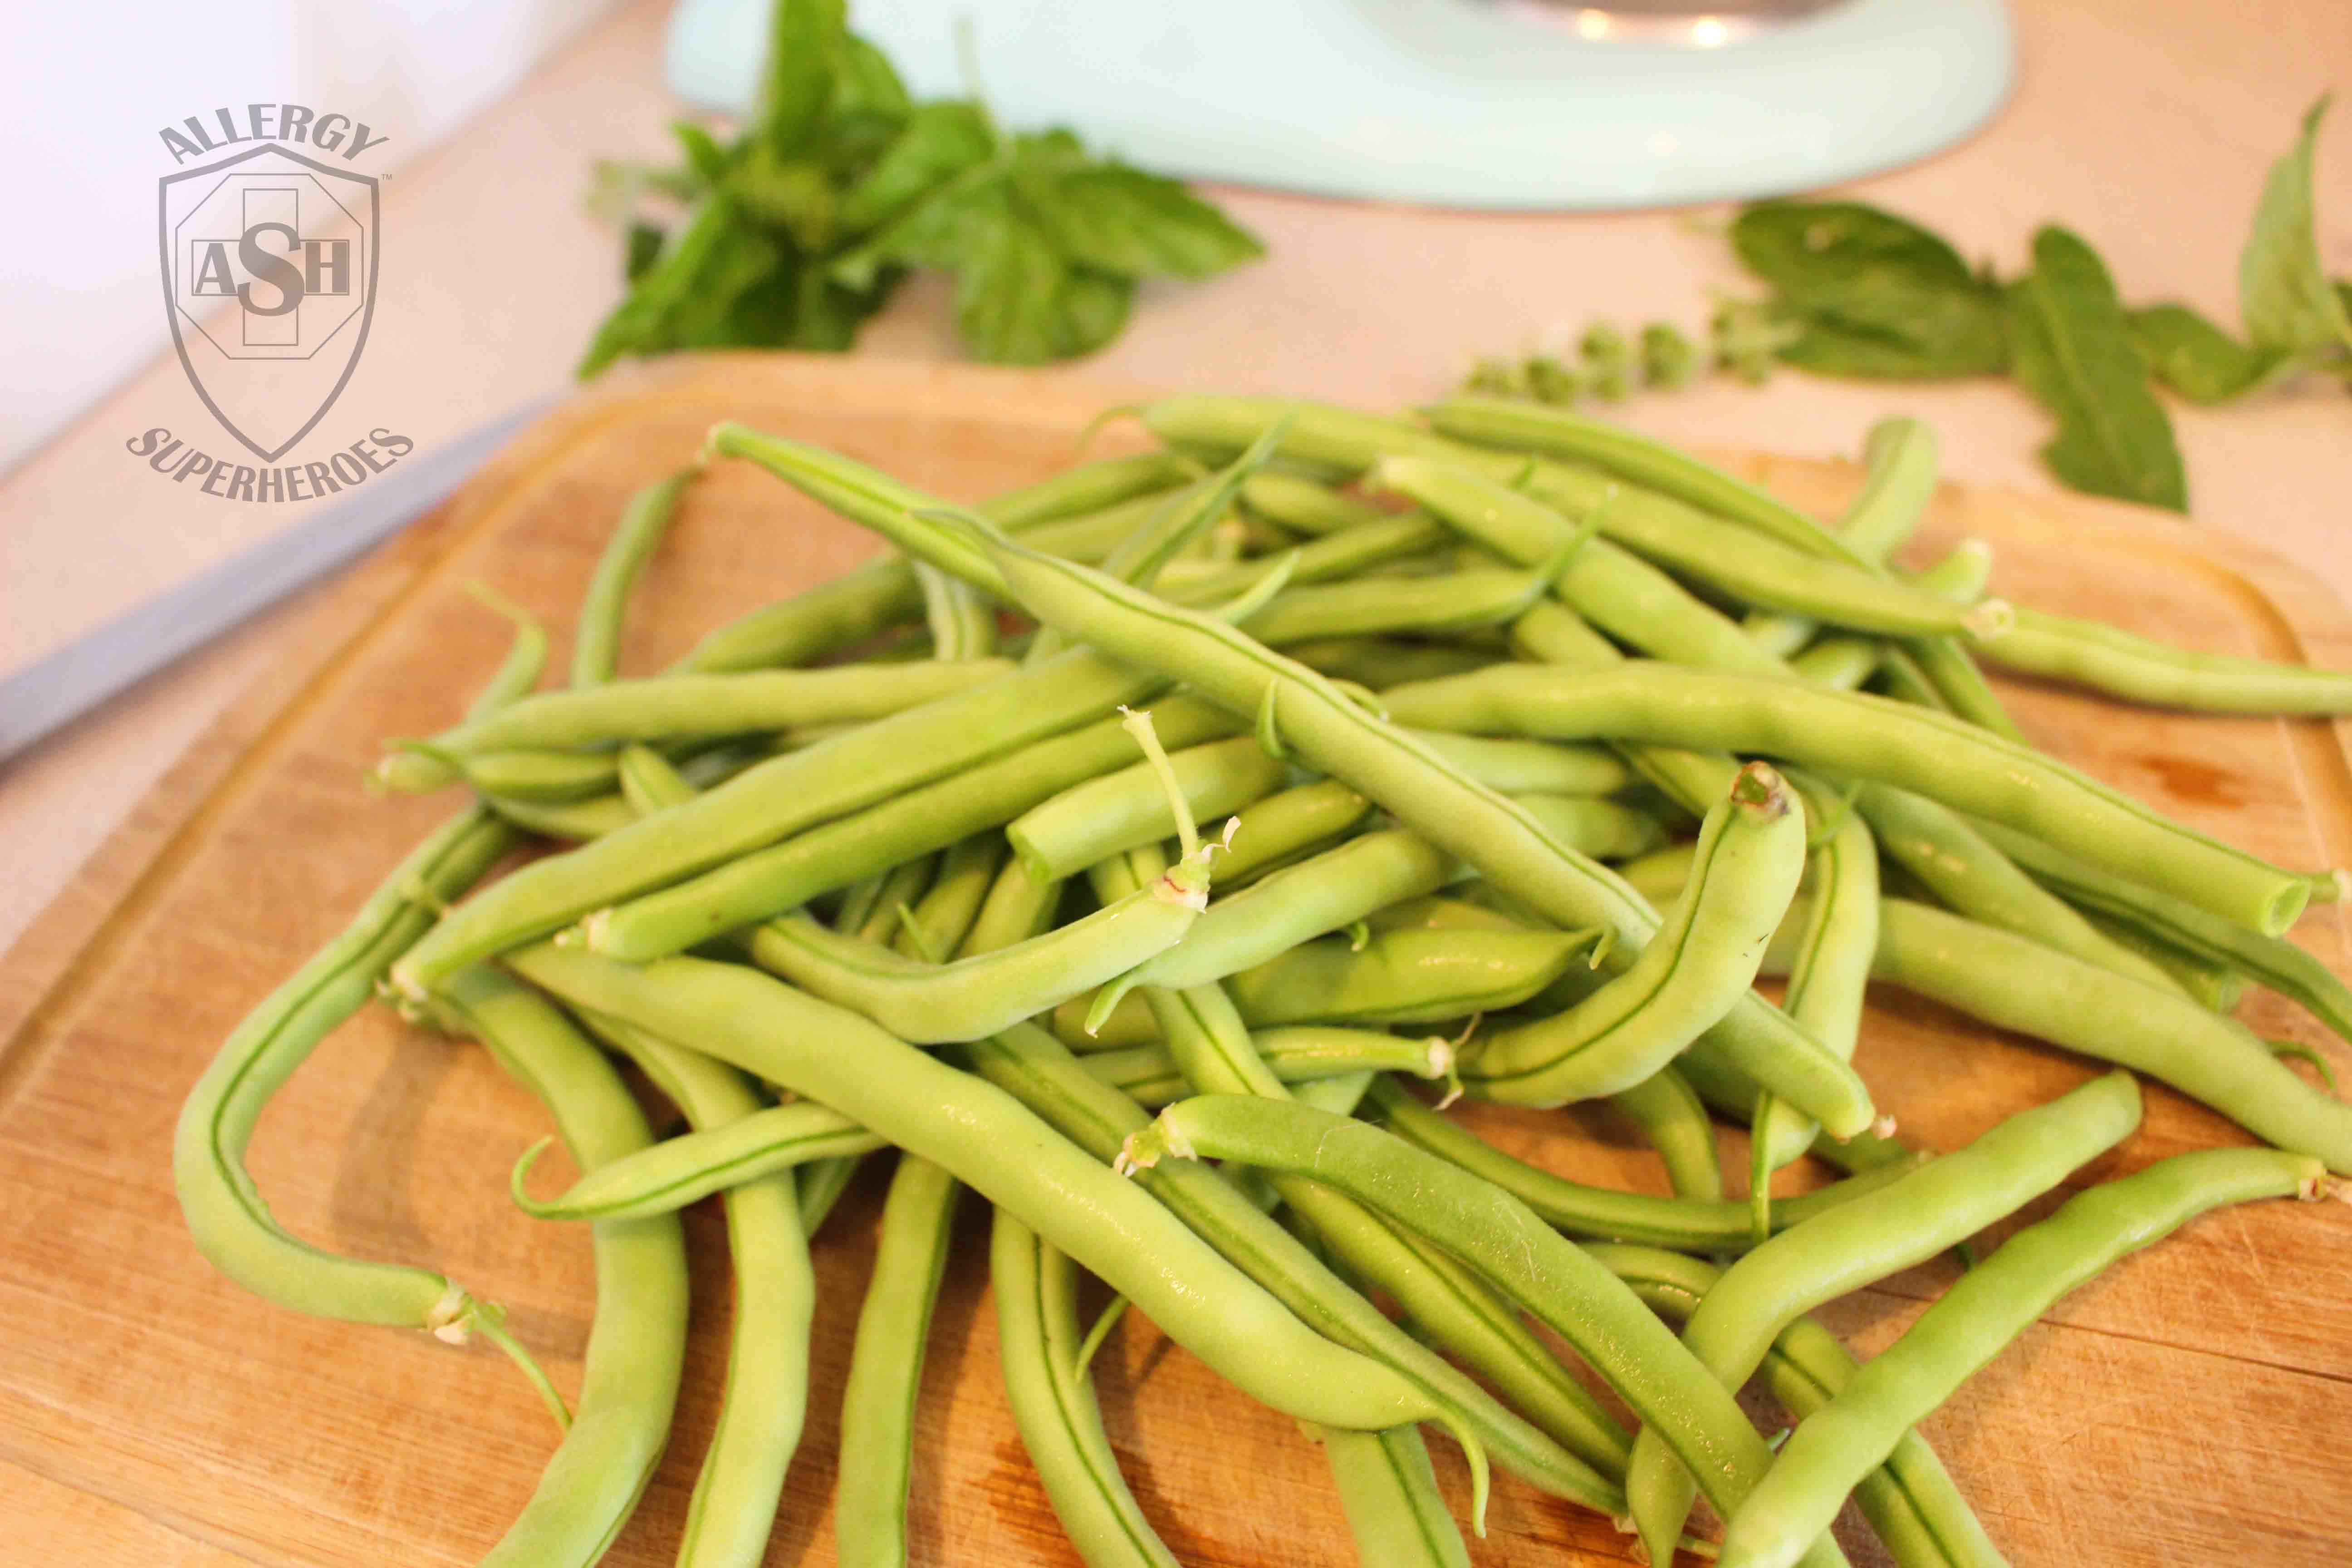 Buttery Basil Green Beans from Allergy Superheroes